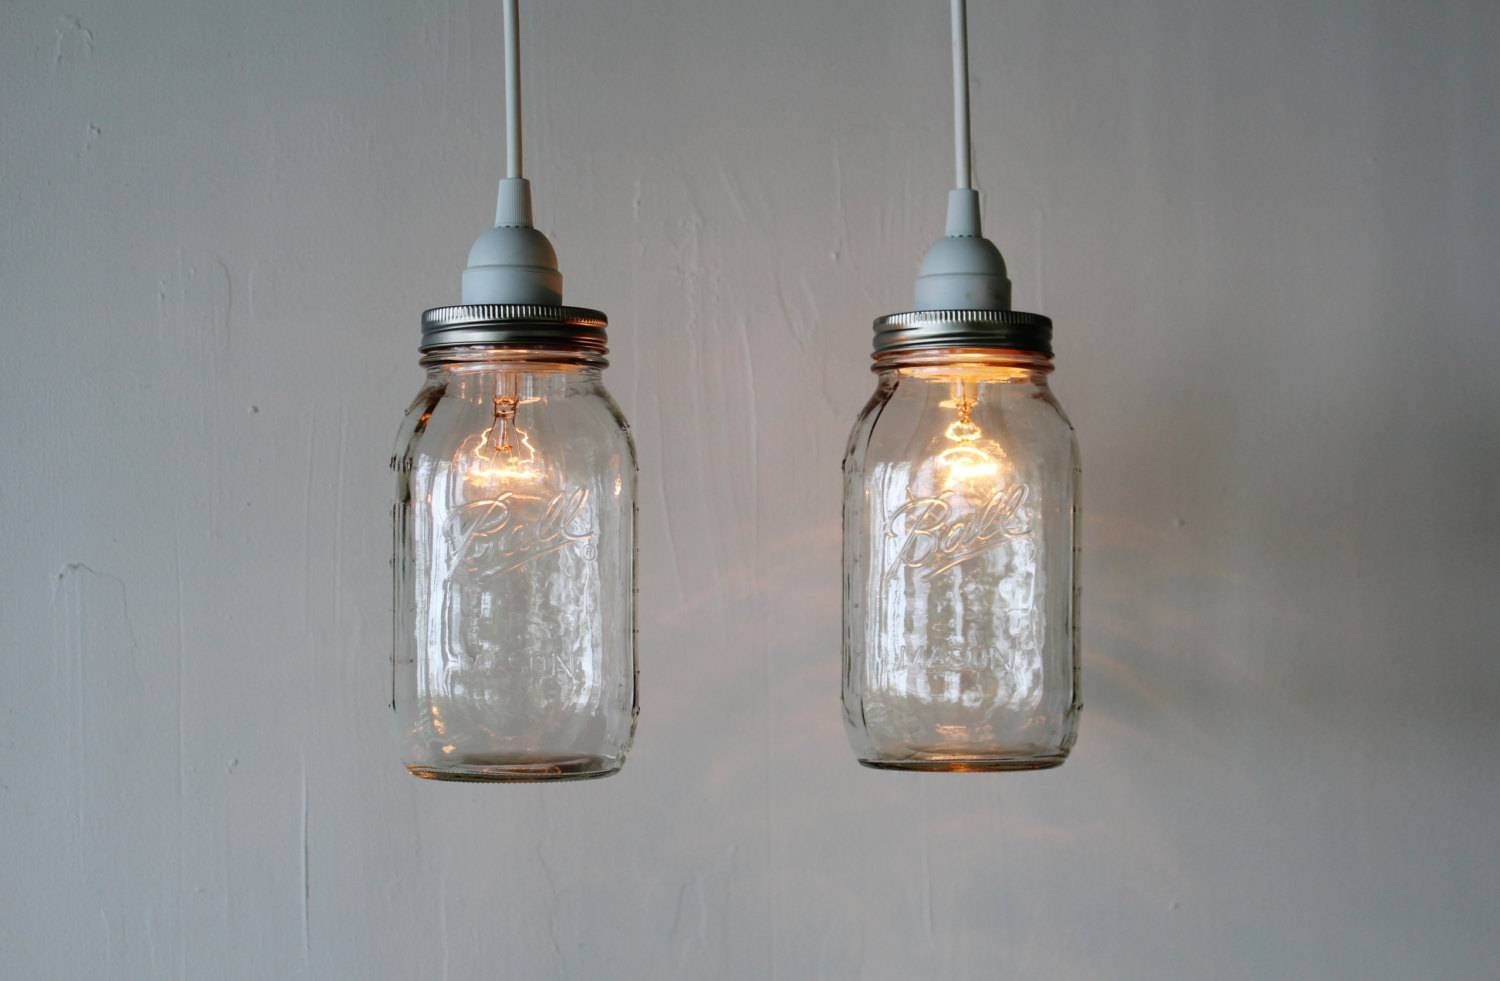 Pair Of Mason Jar Hanging Pendant Lights Upcycled Rustic Within Base Plate Pendant Lights (View 14 of 15)